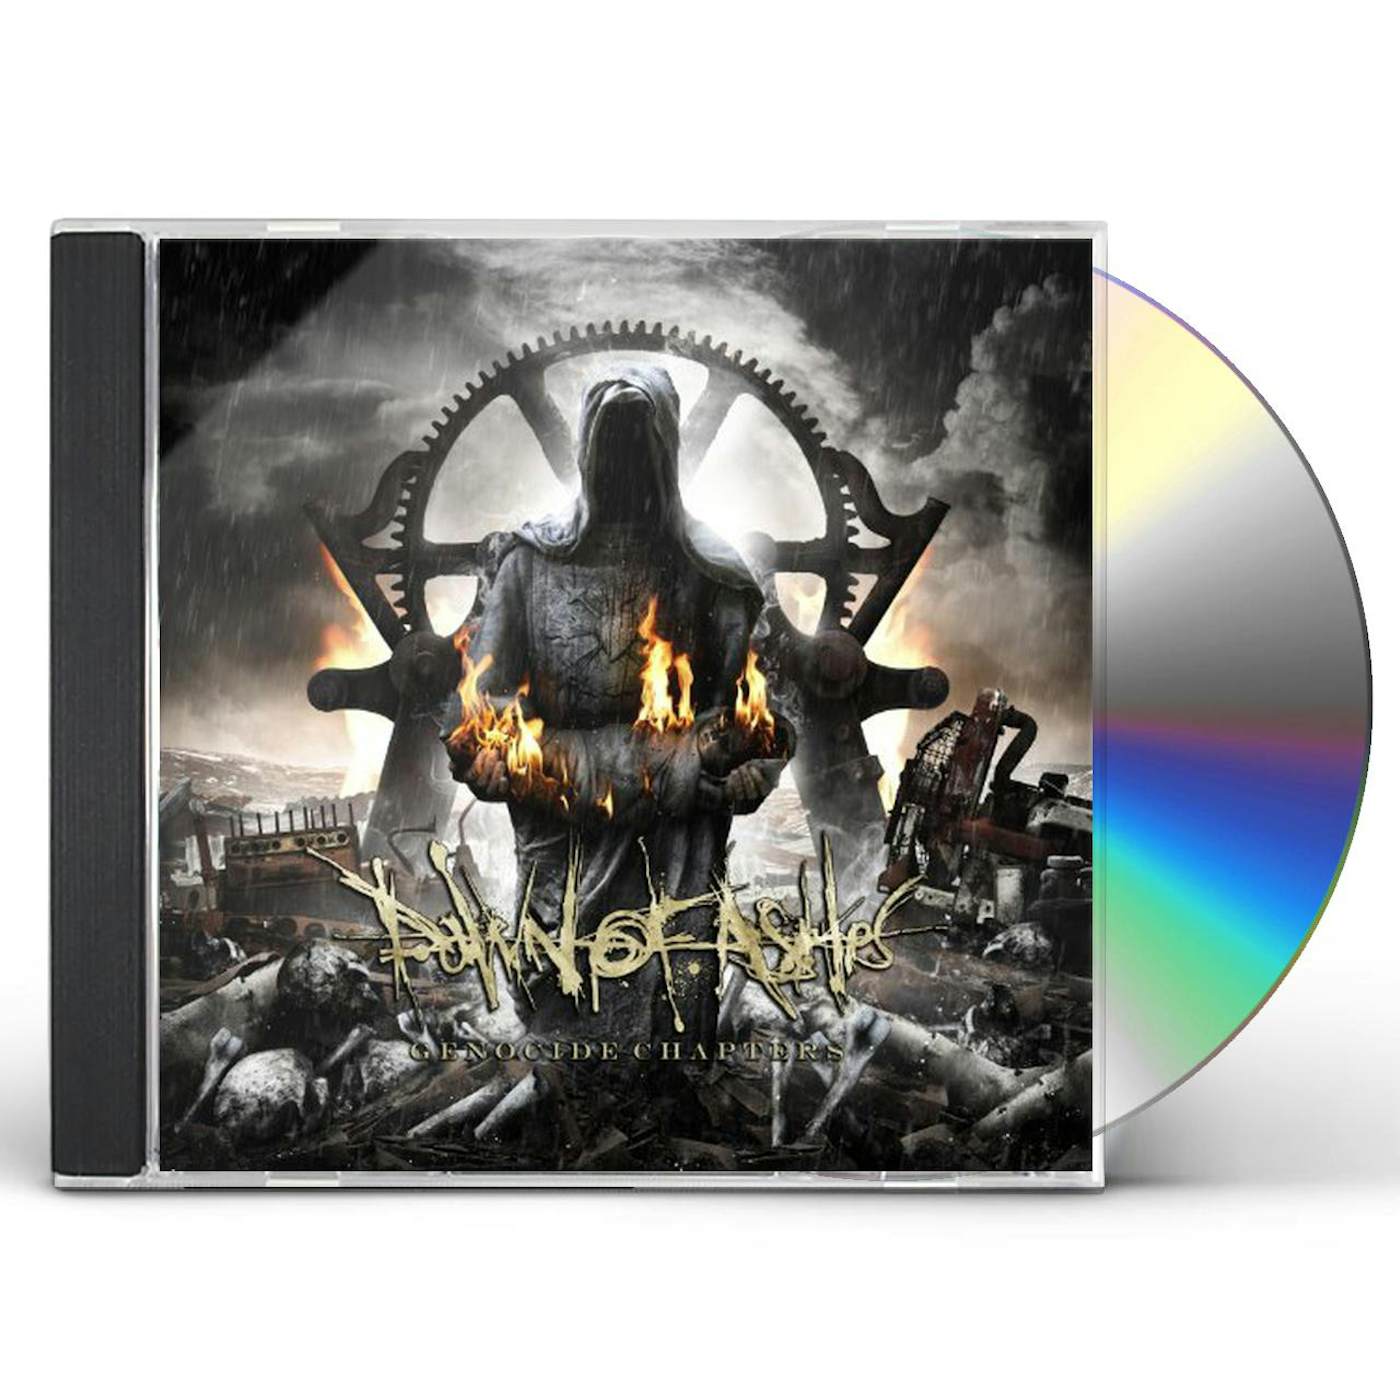 Dawn Of Ashes GENOCIDE CHAPTERS CD